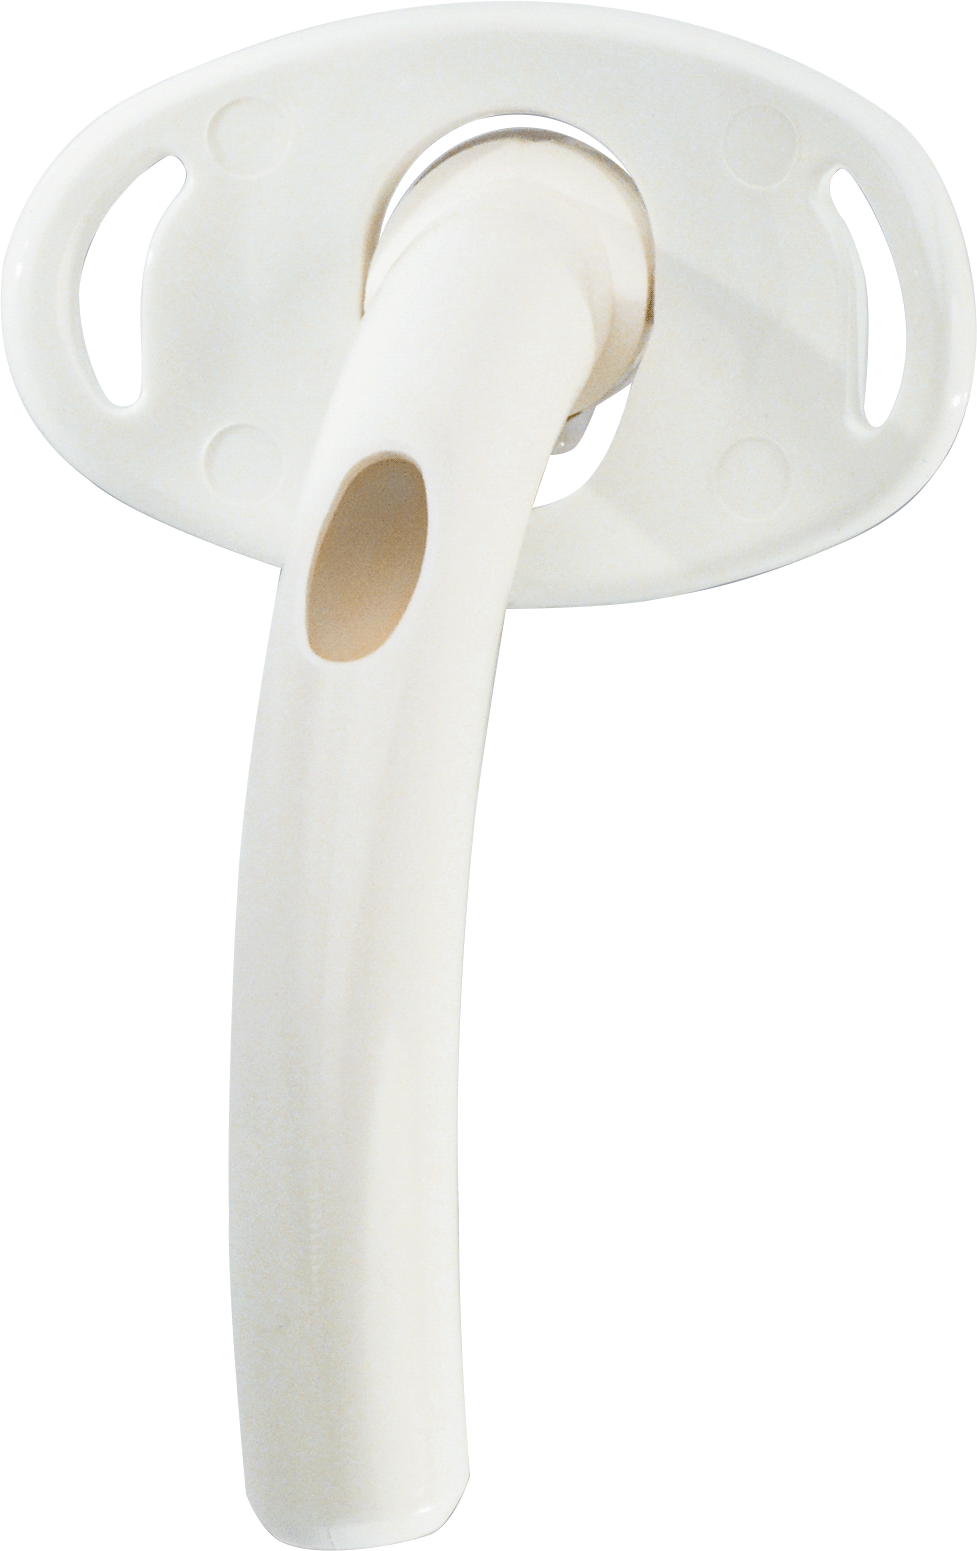 EA/1 - Mallinckrodt Medical Inc Shiley&trade; Fenestrated Reusable Cannula Cuffless Tracheostomy Tube 10 Size 81mm L, 8-8/9mm I.D. x 13-4/5mm O.D., Designed for General Pulmonary Hygiene - Best Buy Medical Supplies